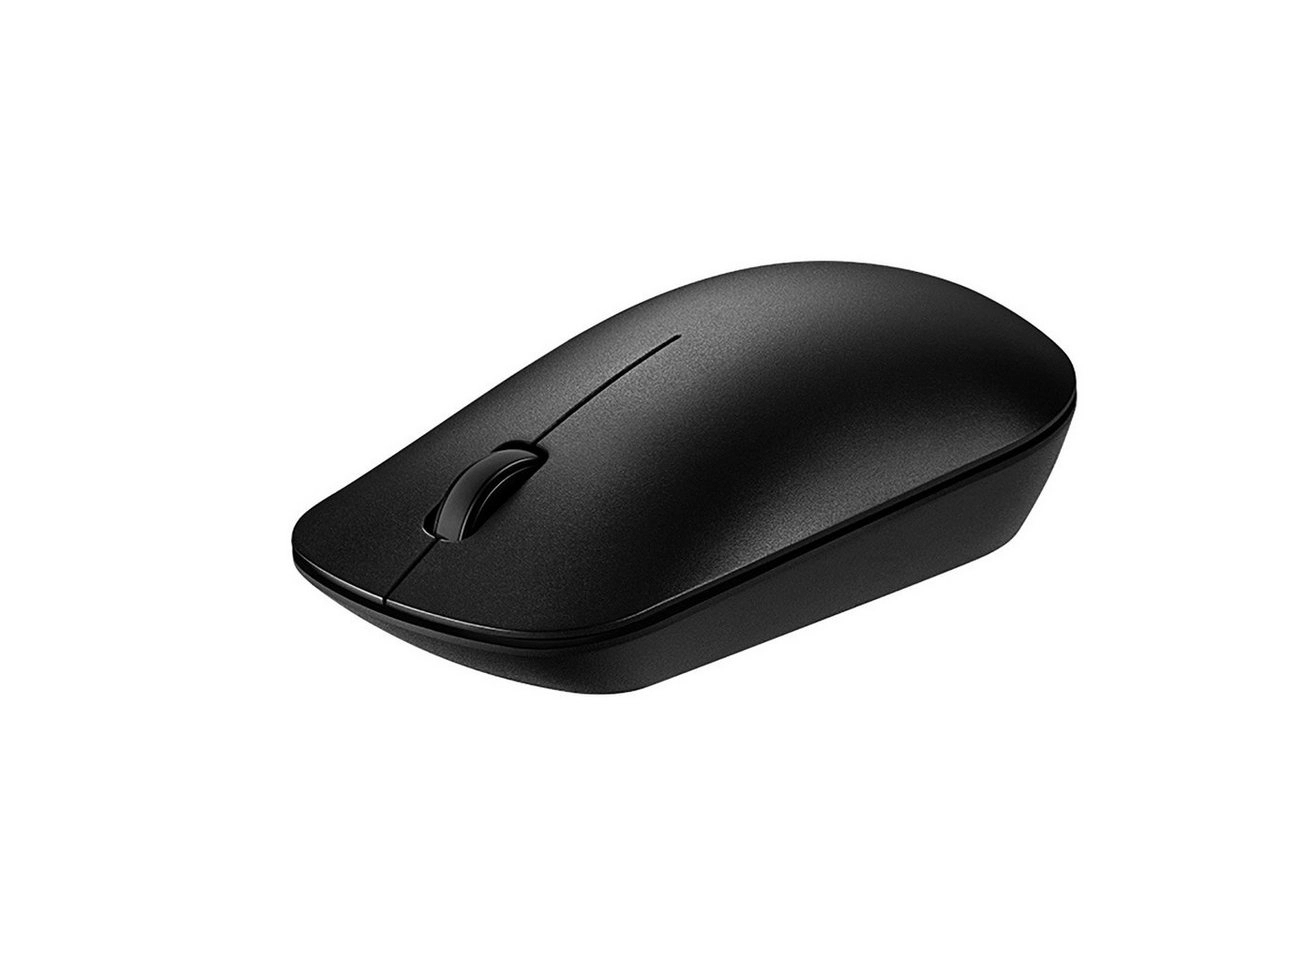 Honor Bluetooth Mouse - Magicbook 2020|Maus|Bluetooth|Schwarz